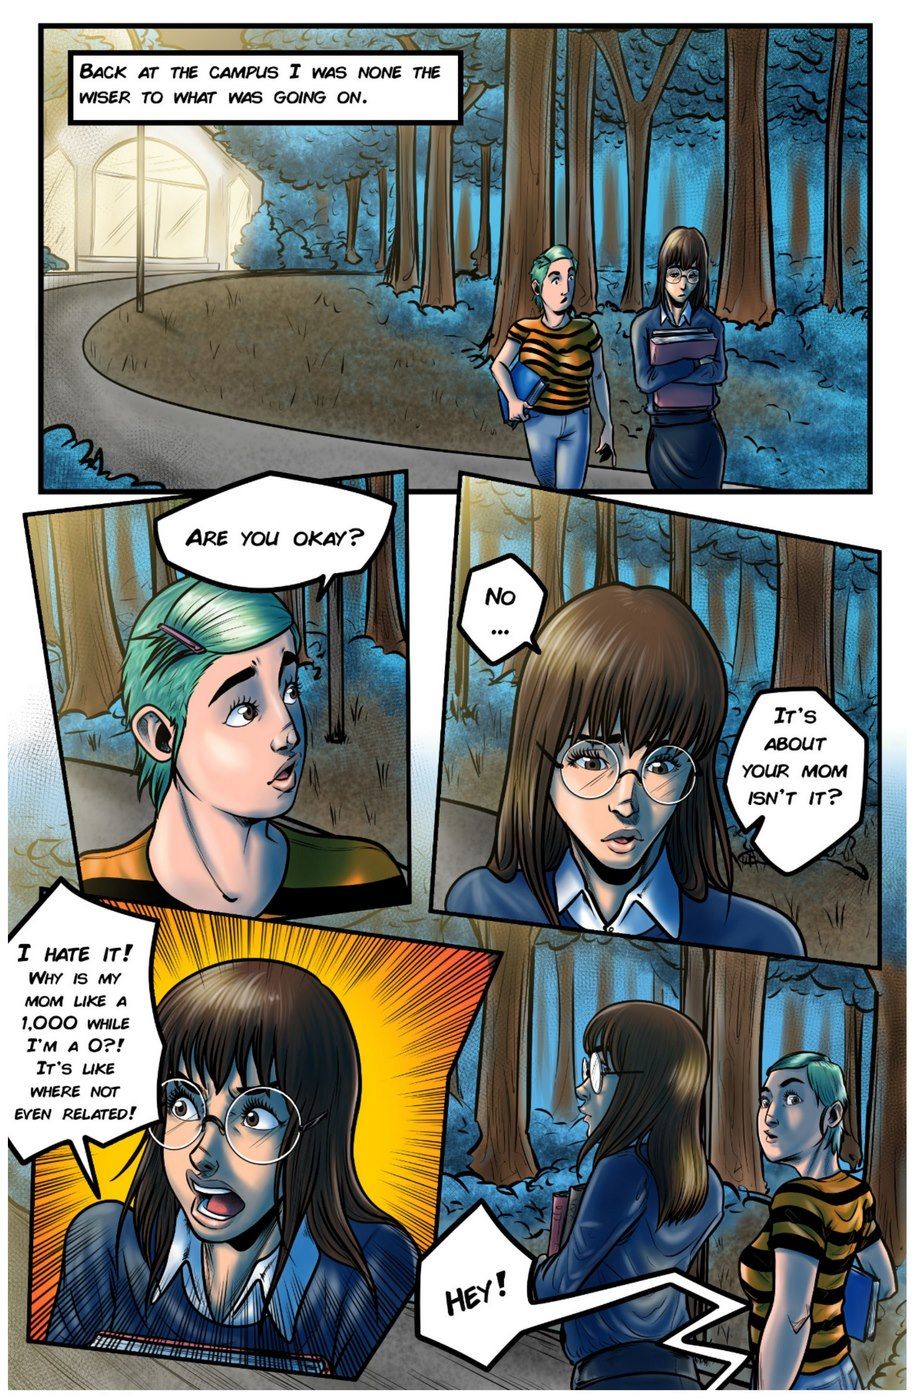 Zero to Z - Cup 2 Issue 2 page 11